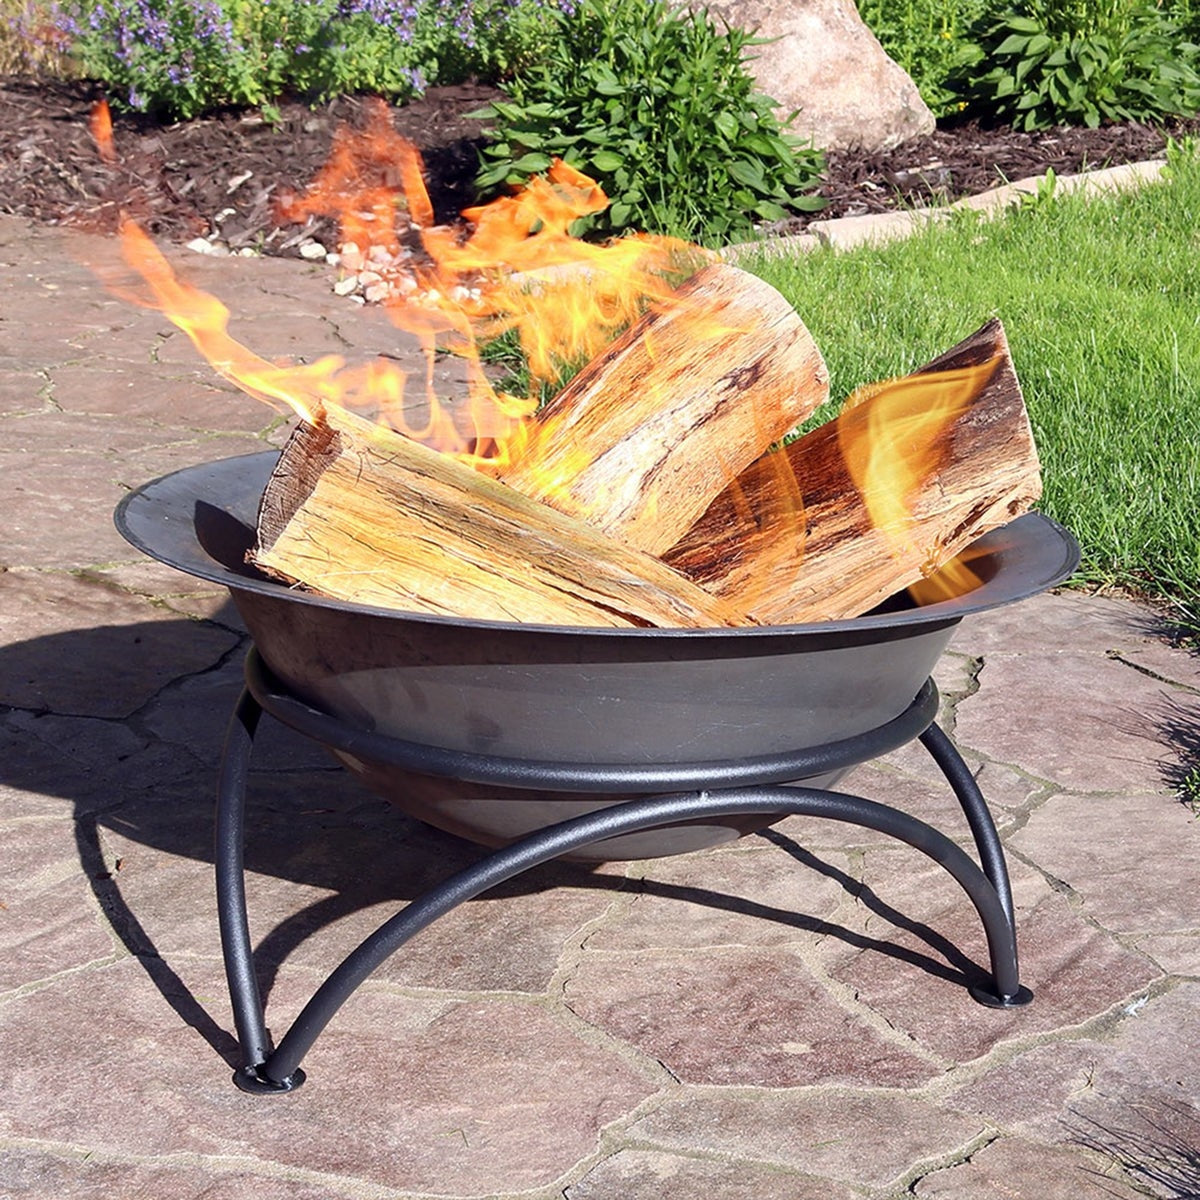 Outdoor > Outdoor Decor > Fire Pits - 23.5 Inch Wood-Burning Small Cast Iron Fire Pit Bowl With Stand